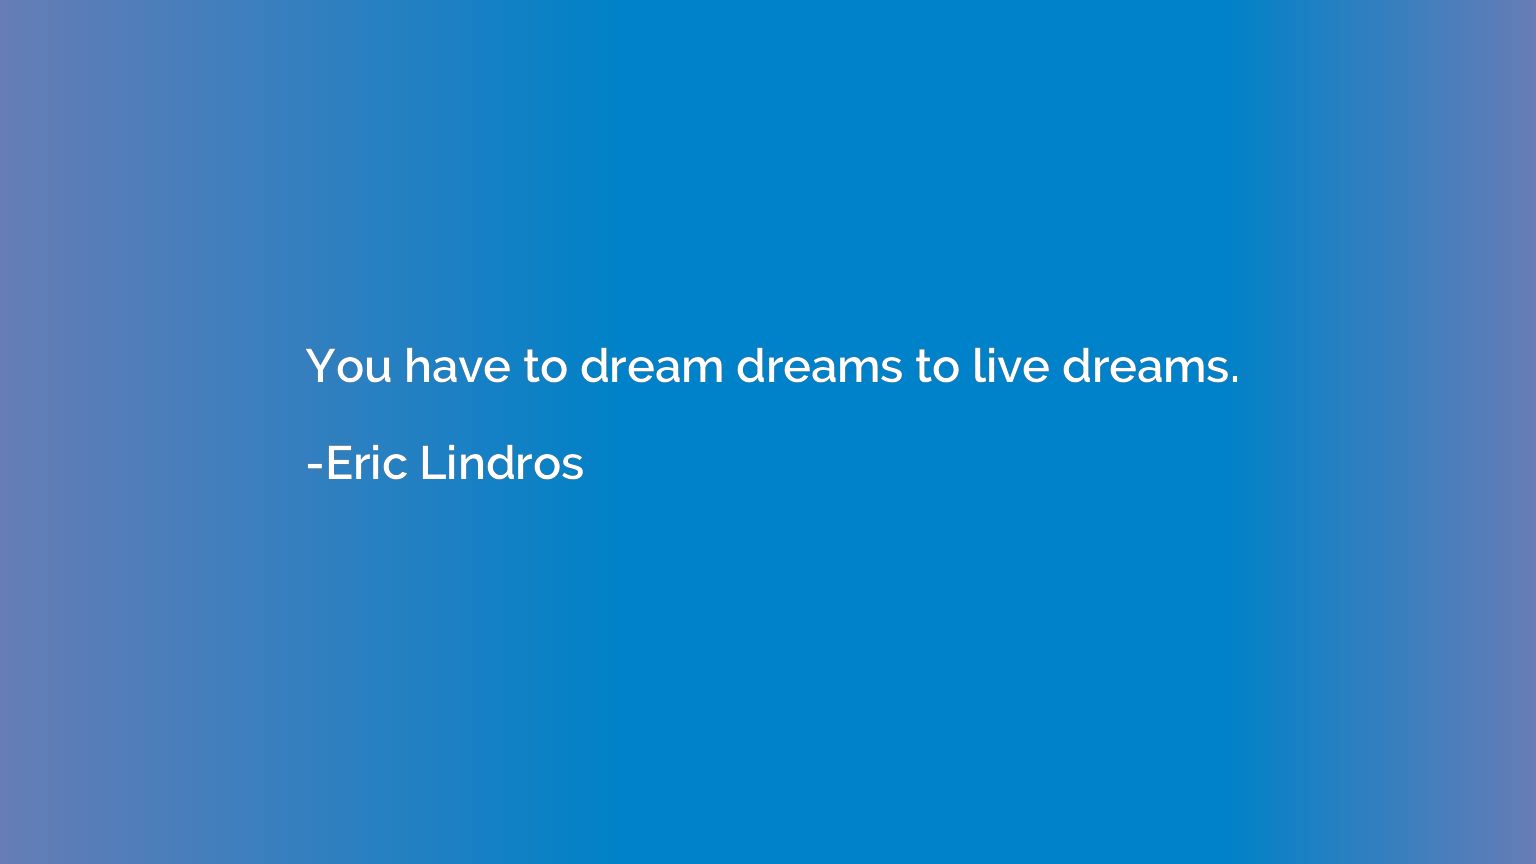 You have to dream dreams to live dreams.